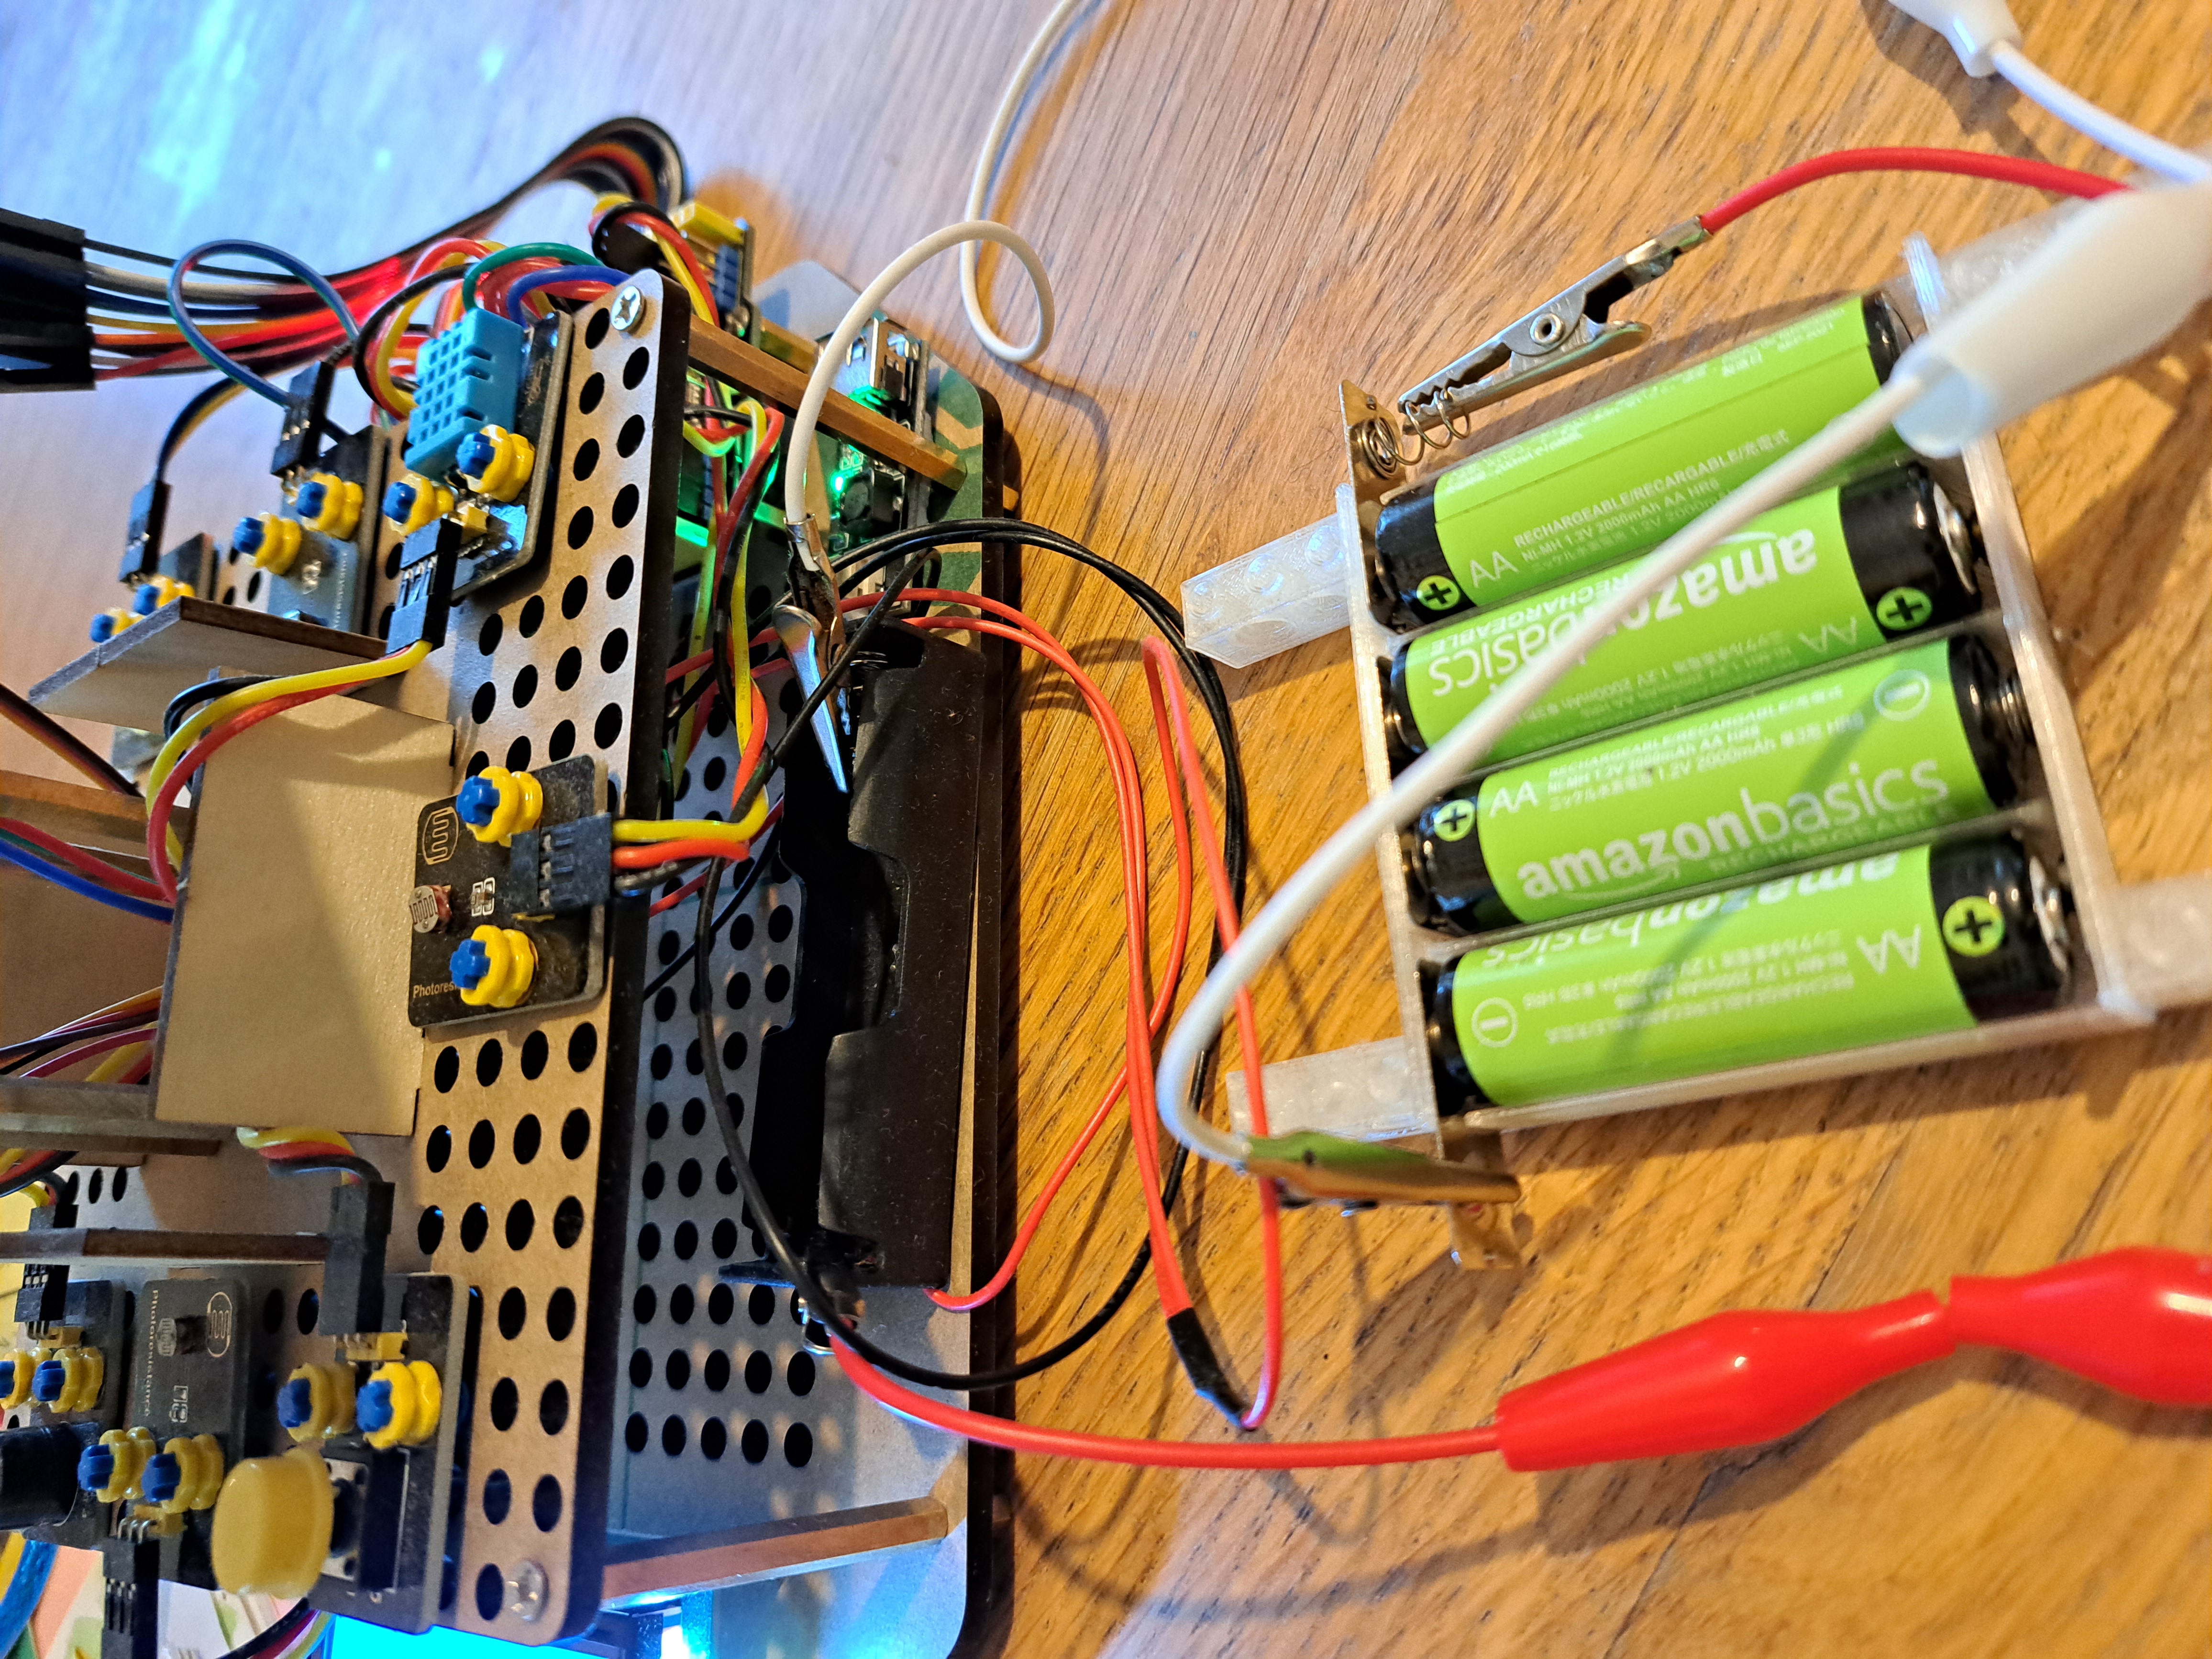 4 AA Batteries instead of Lithium Battery